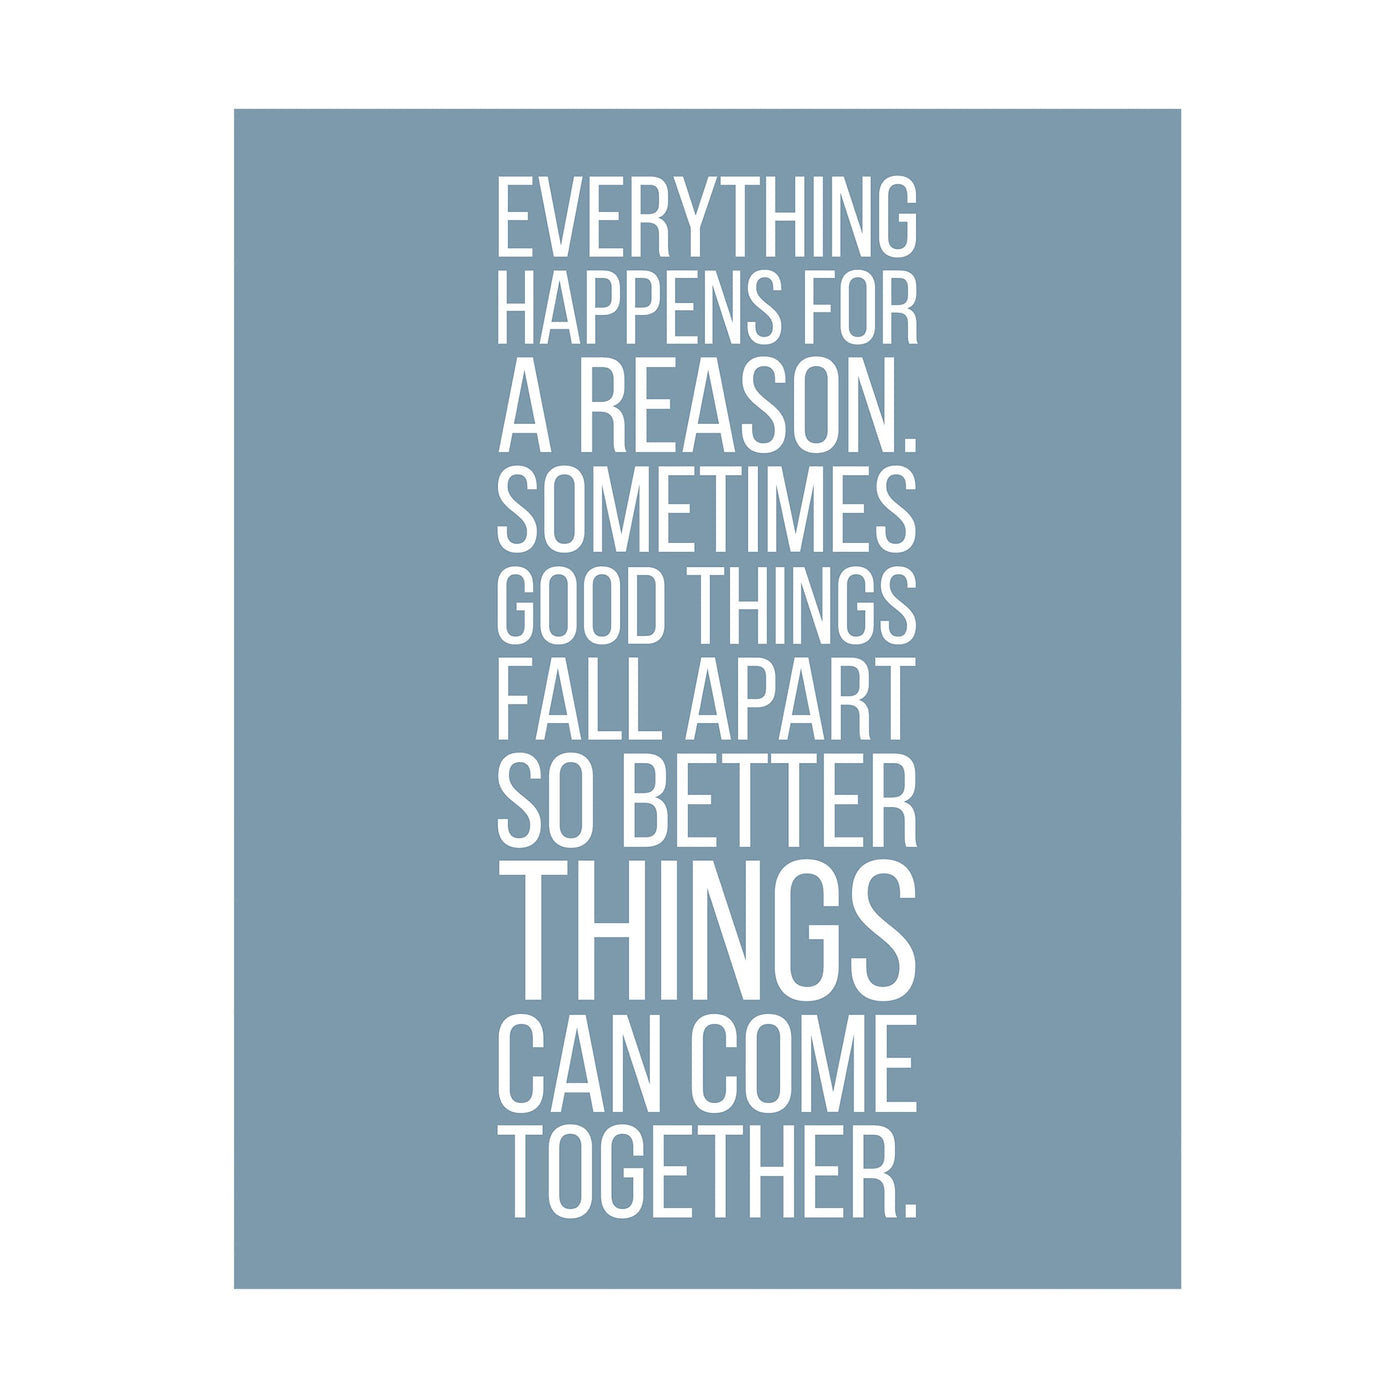 Everything Happens For a Reason-BLUE- Inspirational Quotes Wall Art Sign -11 x 14" Modern Typography Print -Ready to Frame. Motivational Decor for Home-Office-Classroom-Man Cave. Great Life Lesson!